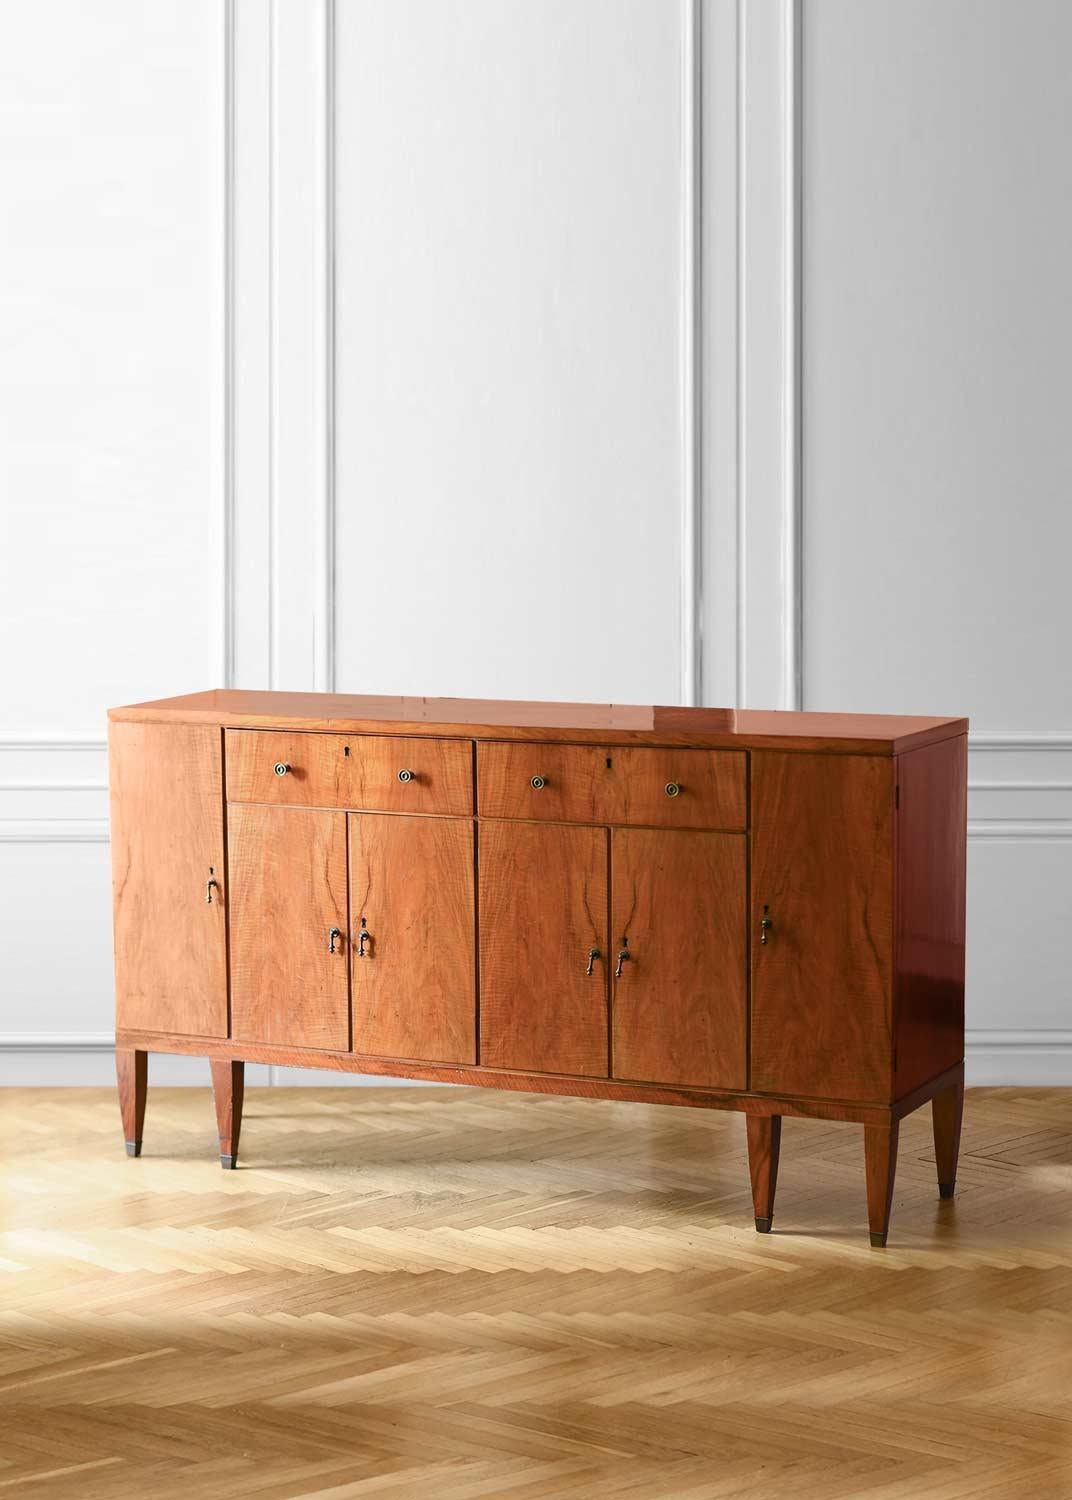 1930-40 Wooden Console with doors and drawers. 
In the style 